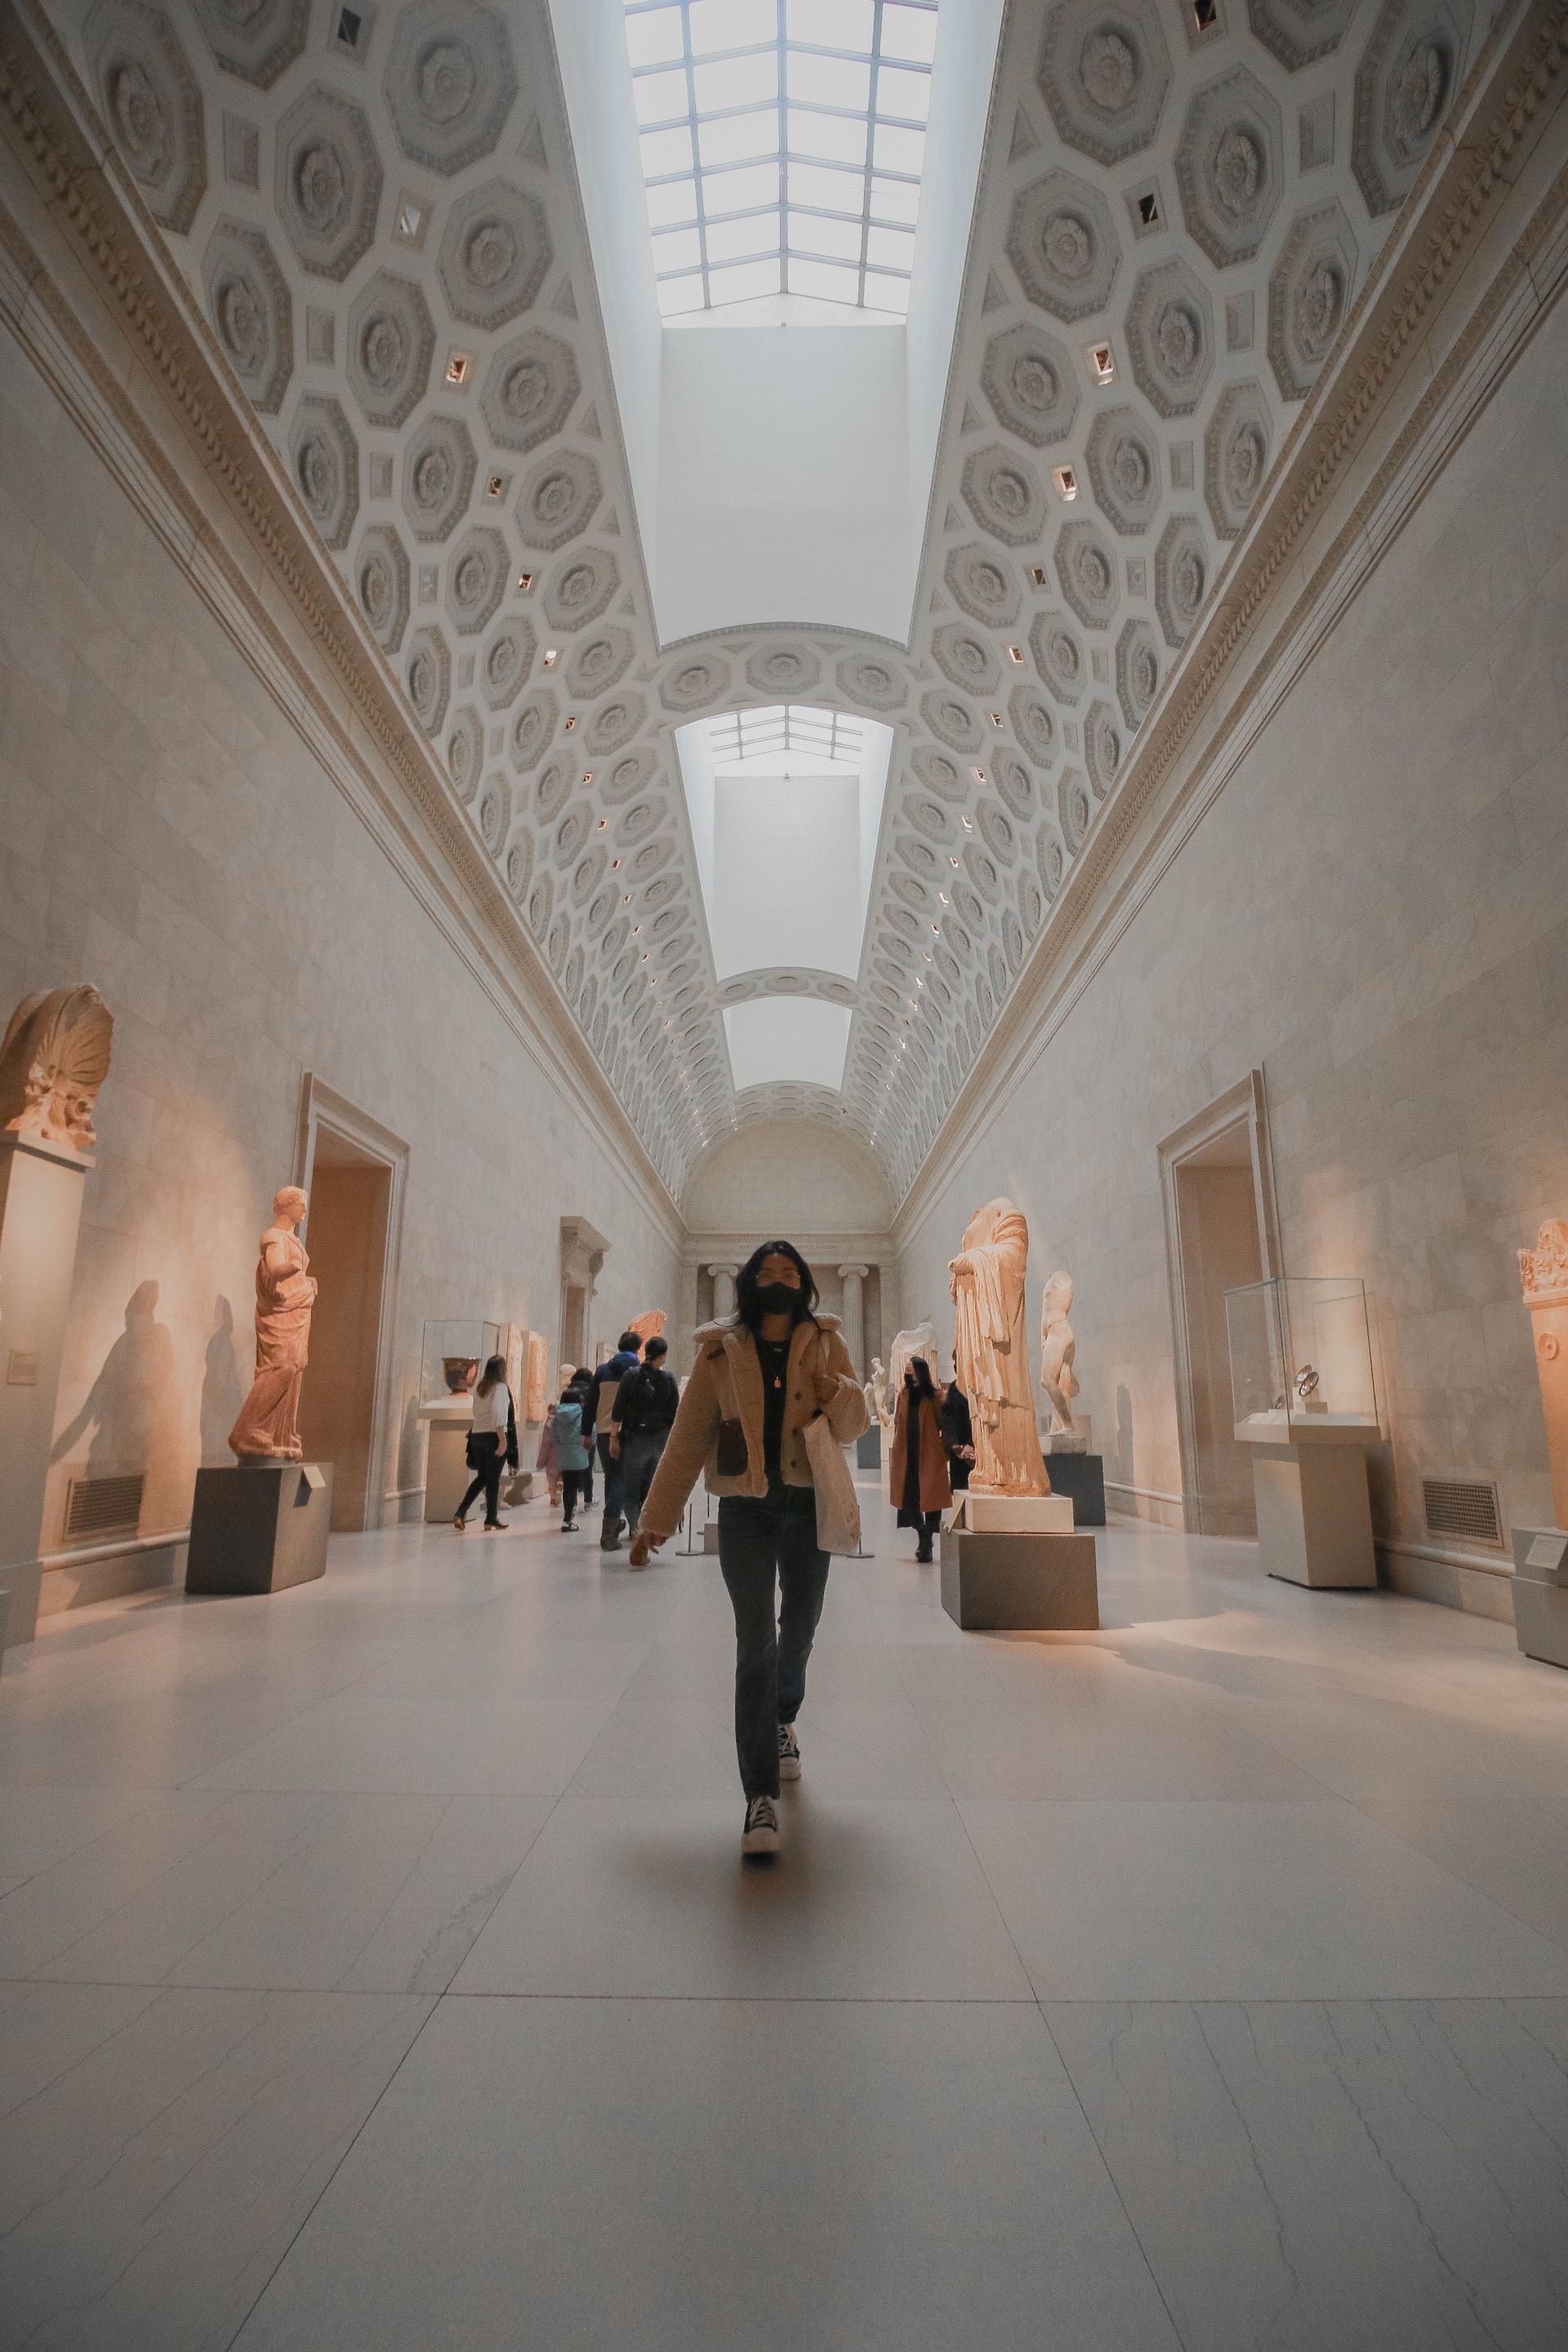 The Greek and Roman galleries of the Metropolitan Museum of Art in New York, which has not confirmed its involvement in the exchange with the Greek government. Photo by Daniela Araya, via Unsplash.